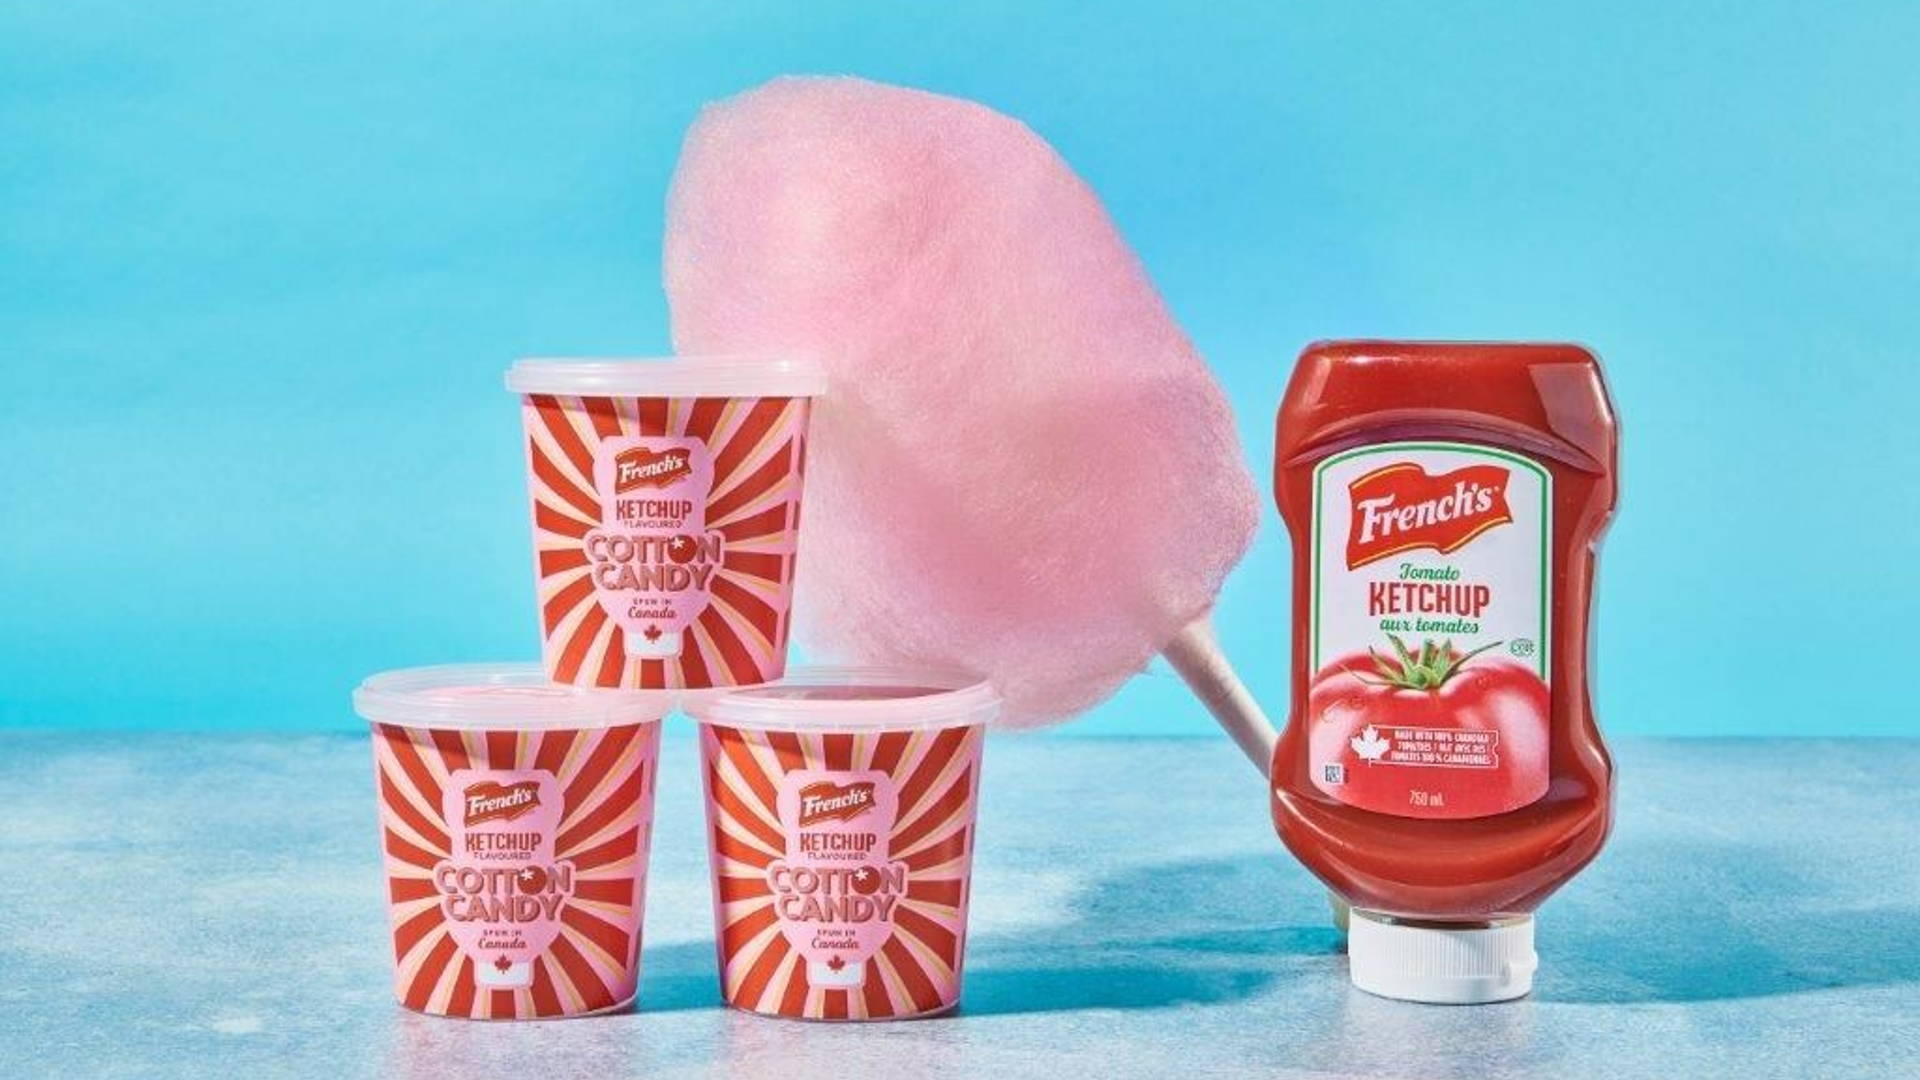 French's Latest Summer Treat Remix Combines Ketchup With Cotton